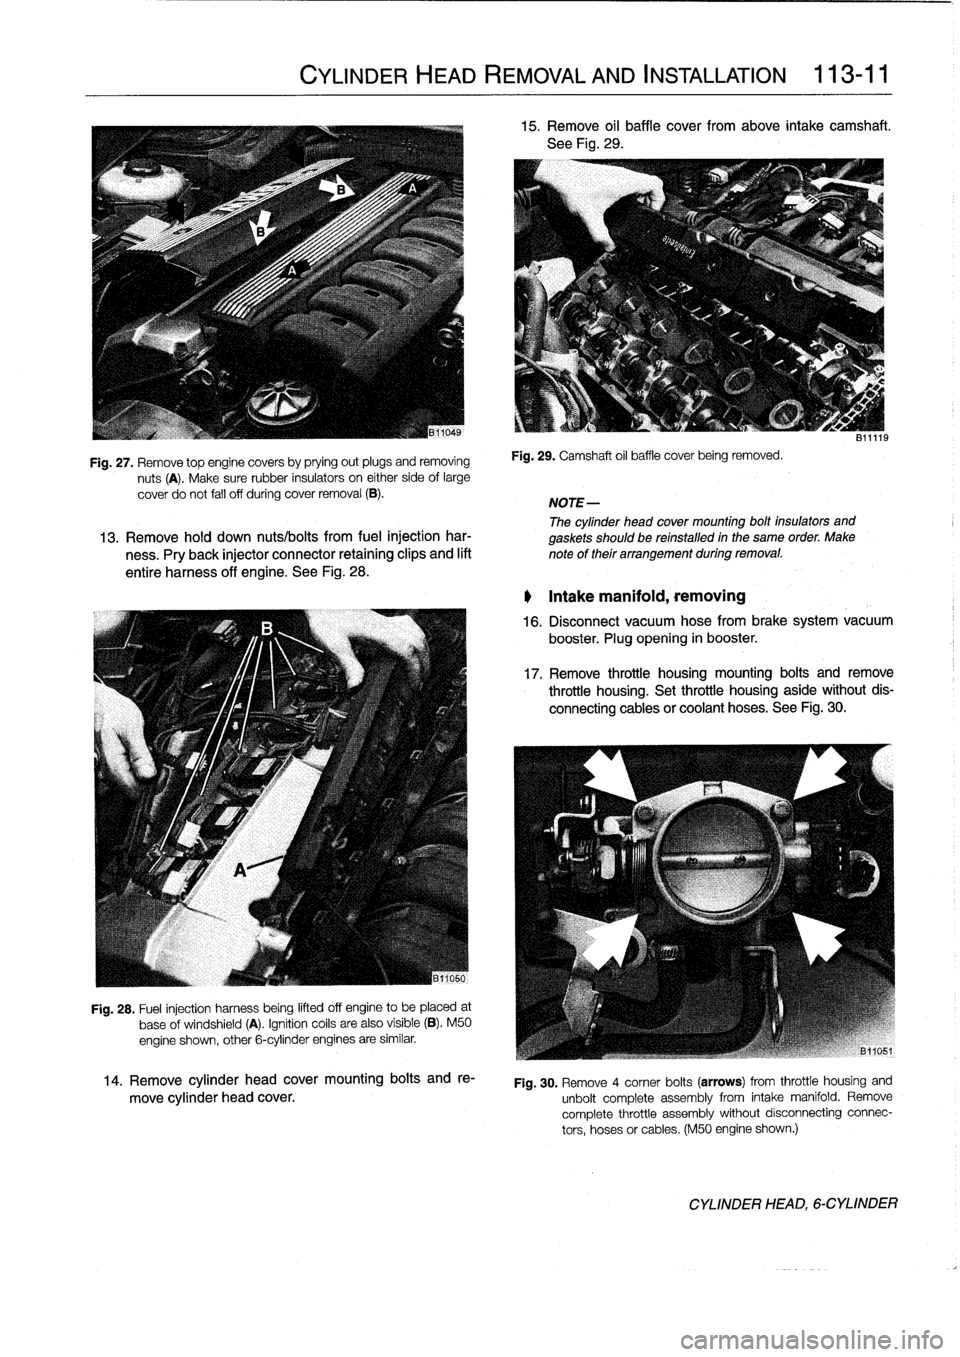 BMW M3 1996 E36 Manual PDF 
Fig
.
27
.
Remove
top
enginecovers
by
prying
out
plugs
and
removing

nuts
(A)
.
Make
sure
rubber
insulators
on
either
side
of
large

cover
do
not
fall
off
during
cover
removal
(B)
.

Fig
.
28
.
Fuel
